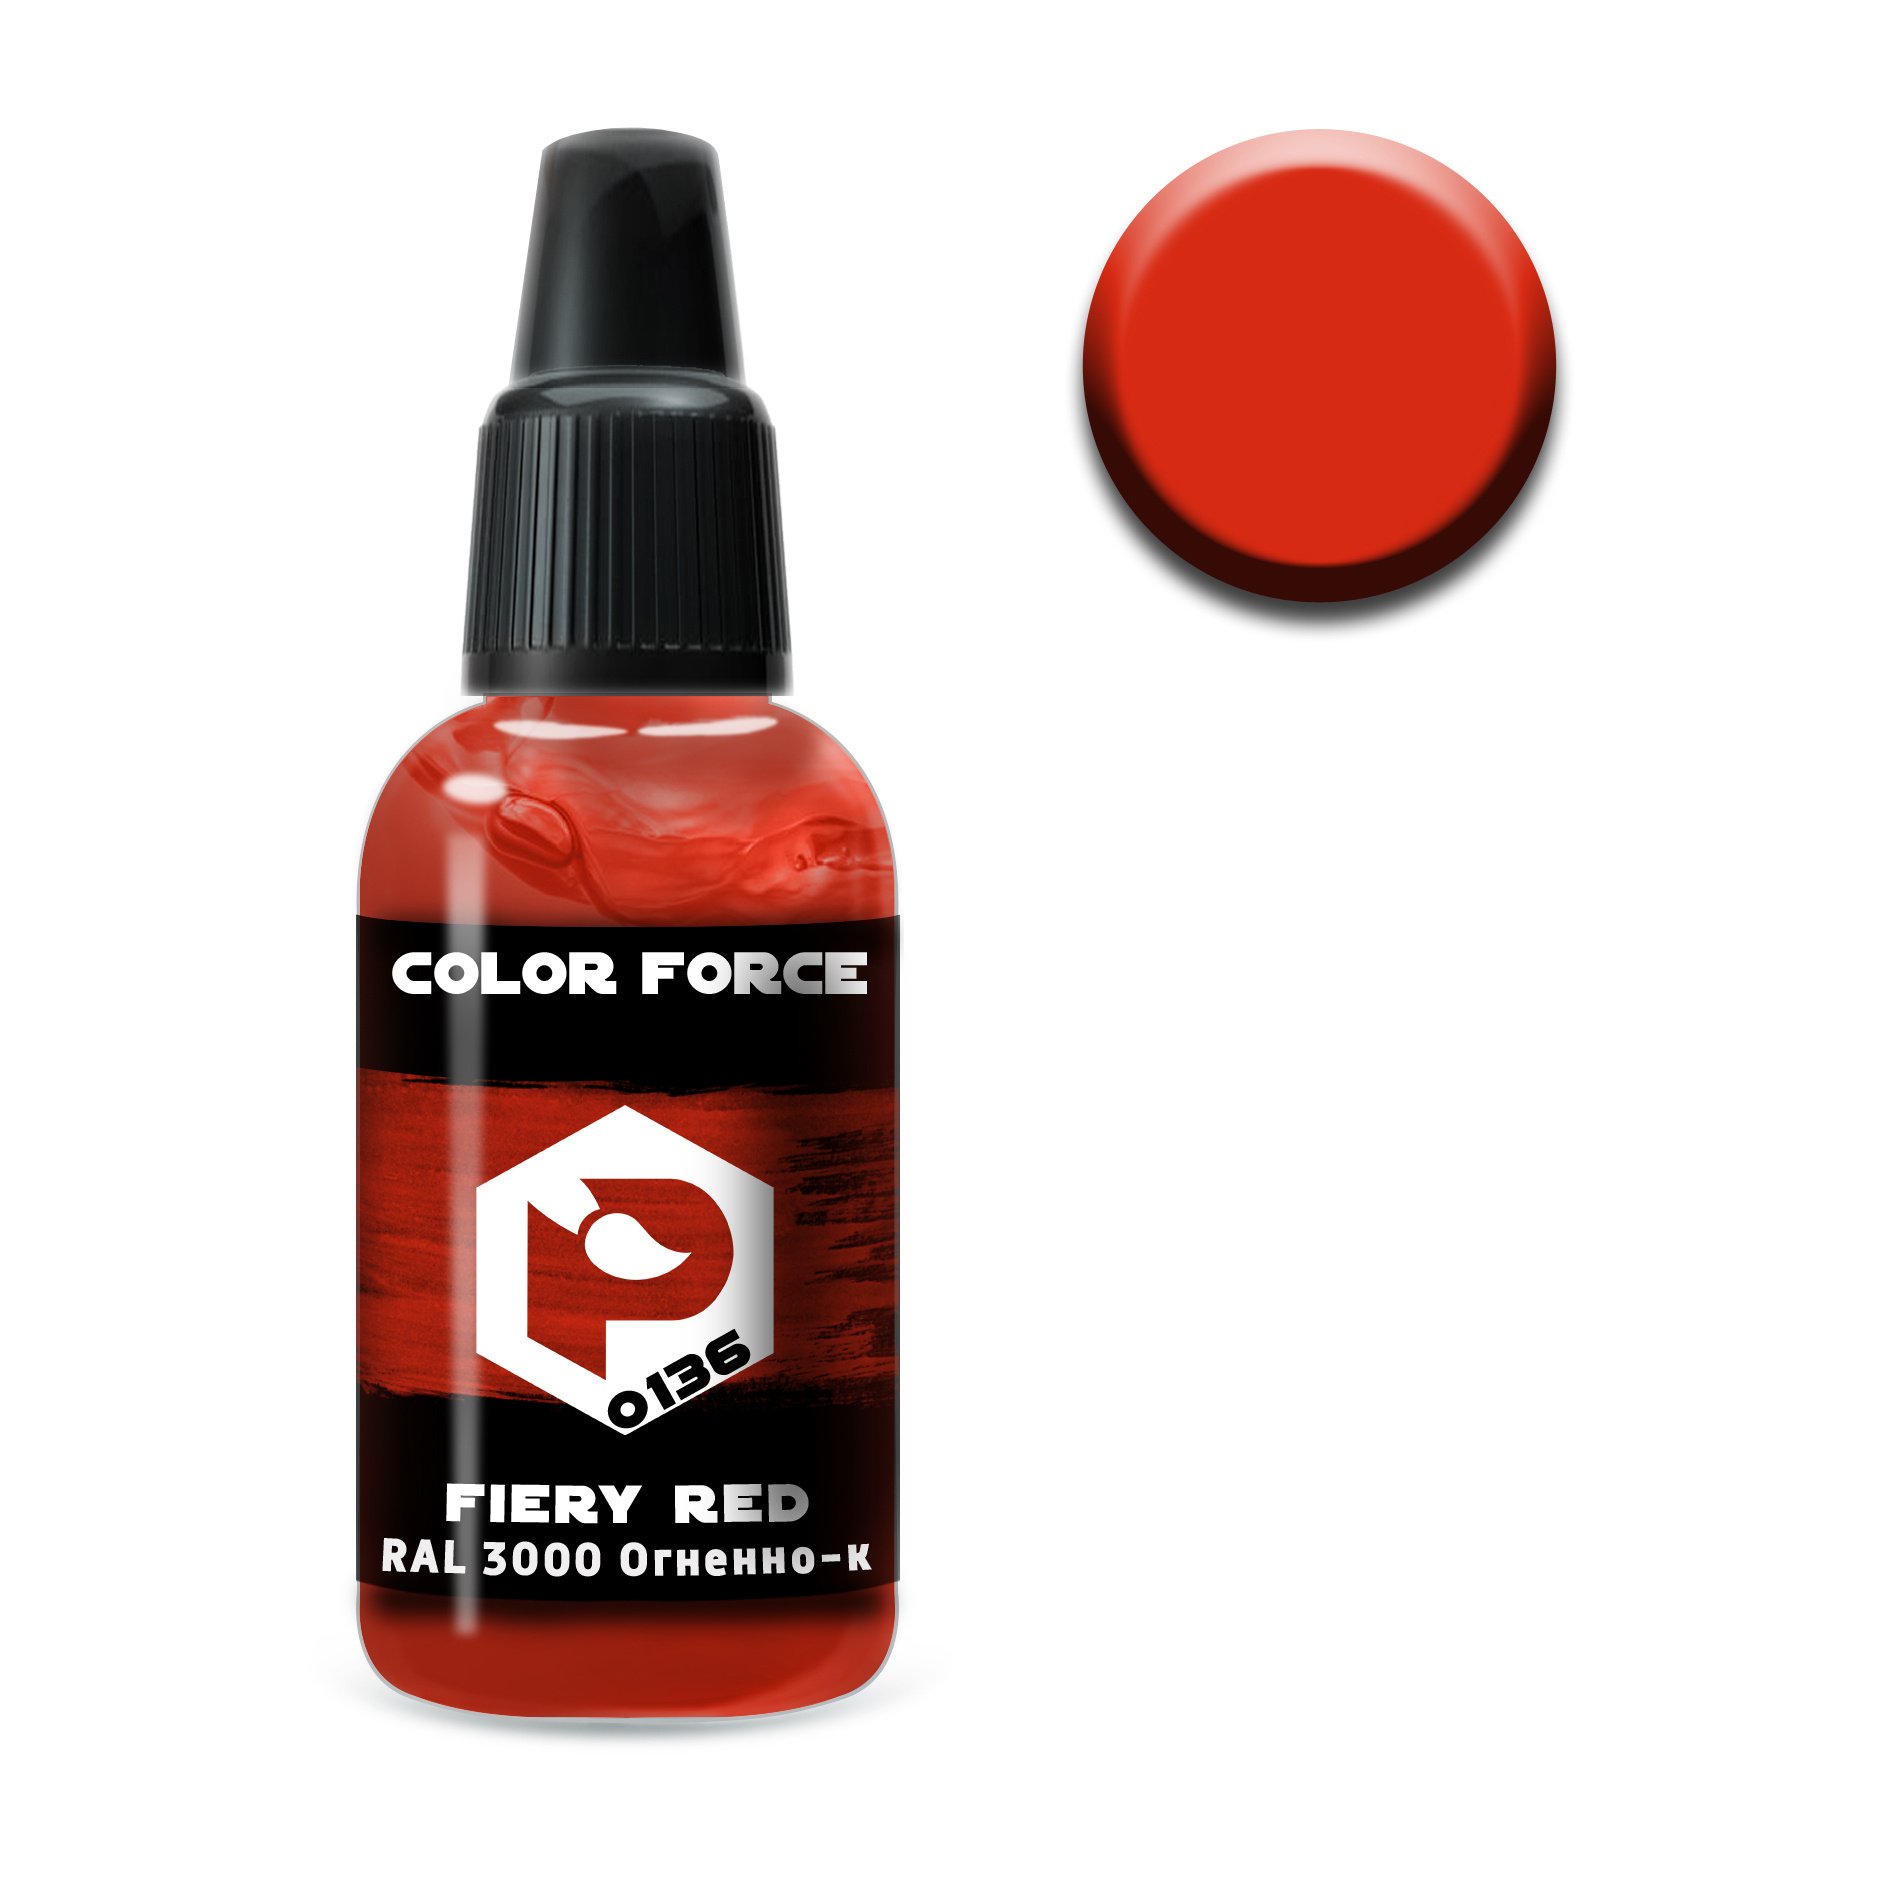 art.0136 Pacific88 airbrush Paint RAL 3000 Fiery red (Fiery red)